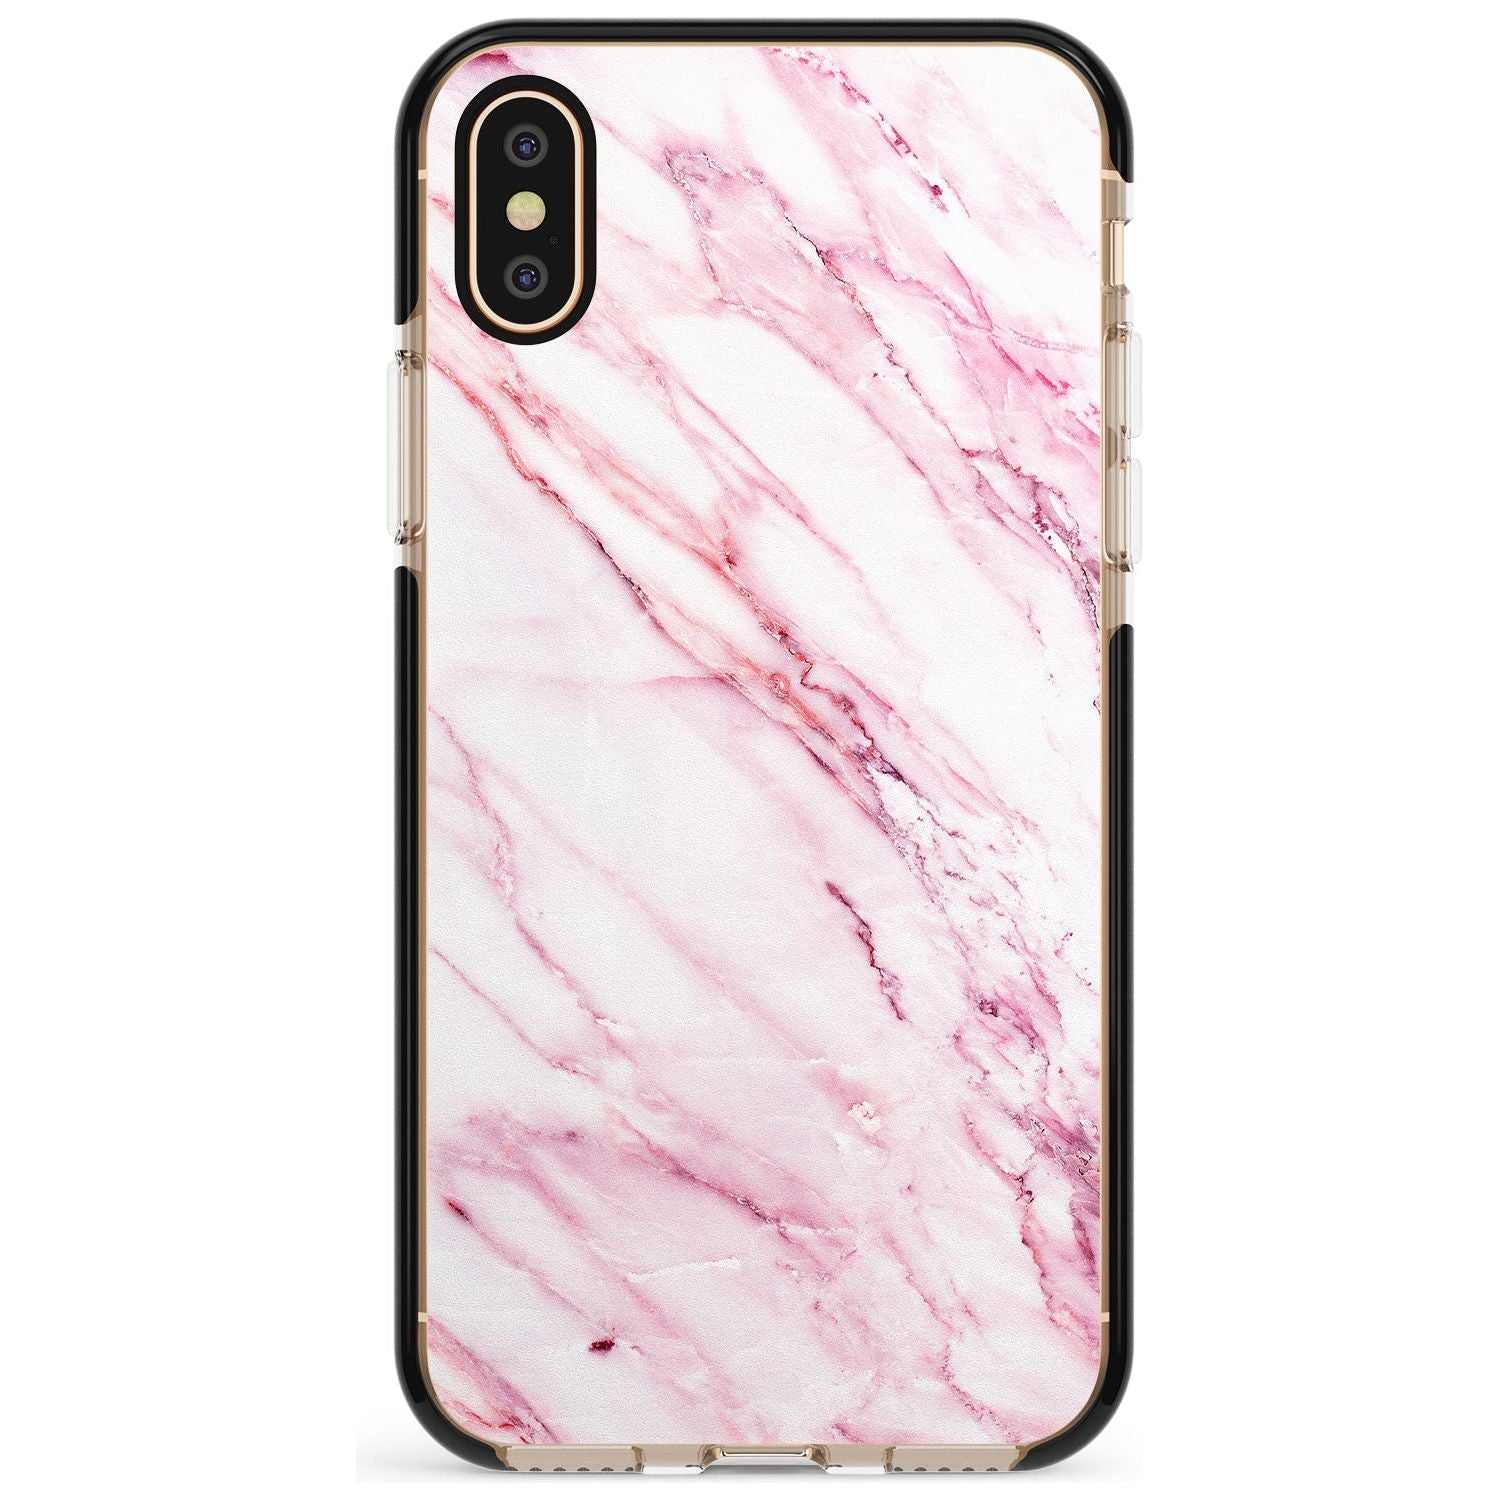 White & Pink Onyx Marble Texture Pink Fade Impact Phone Case for iPhone X XS Max XR